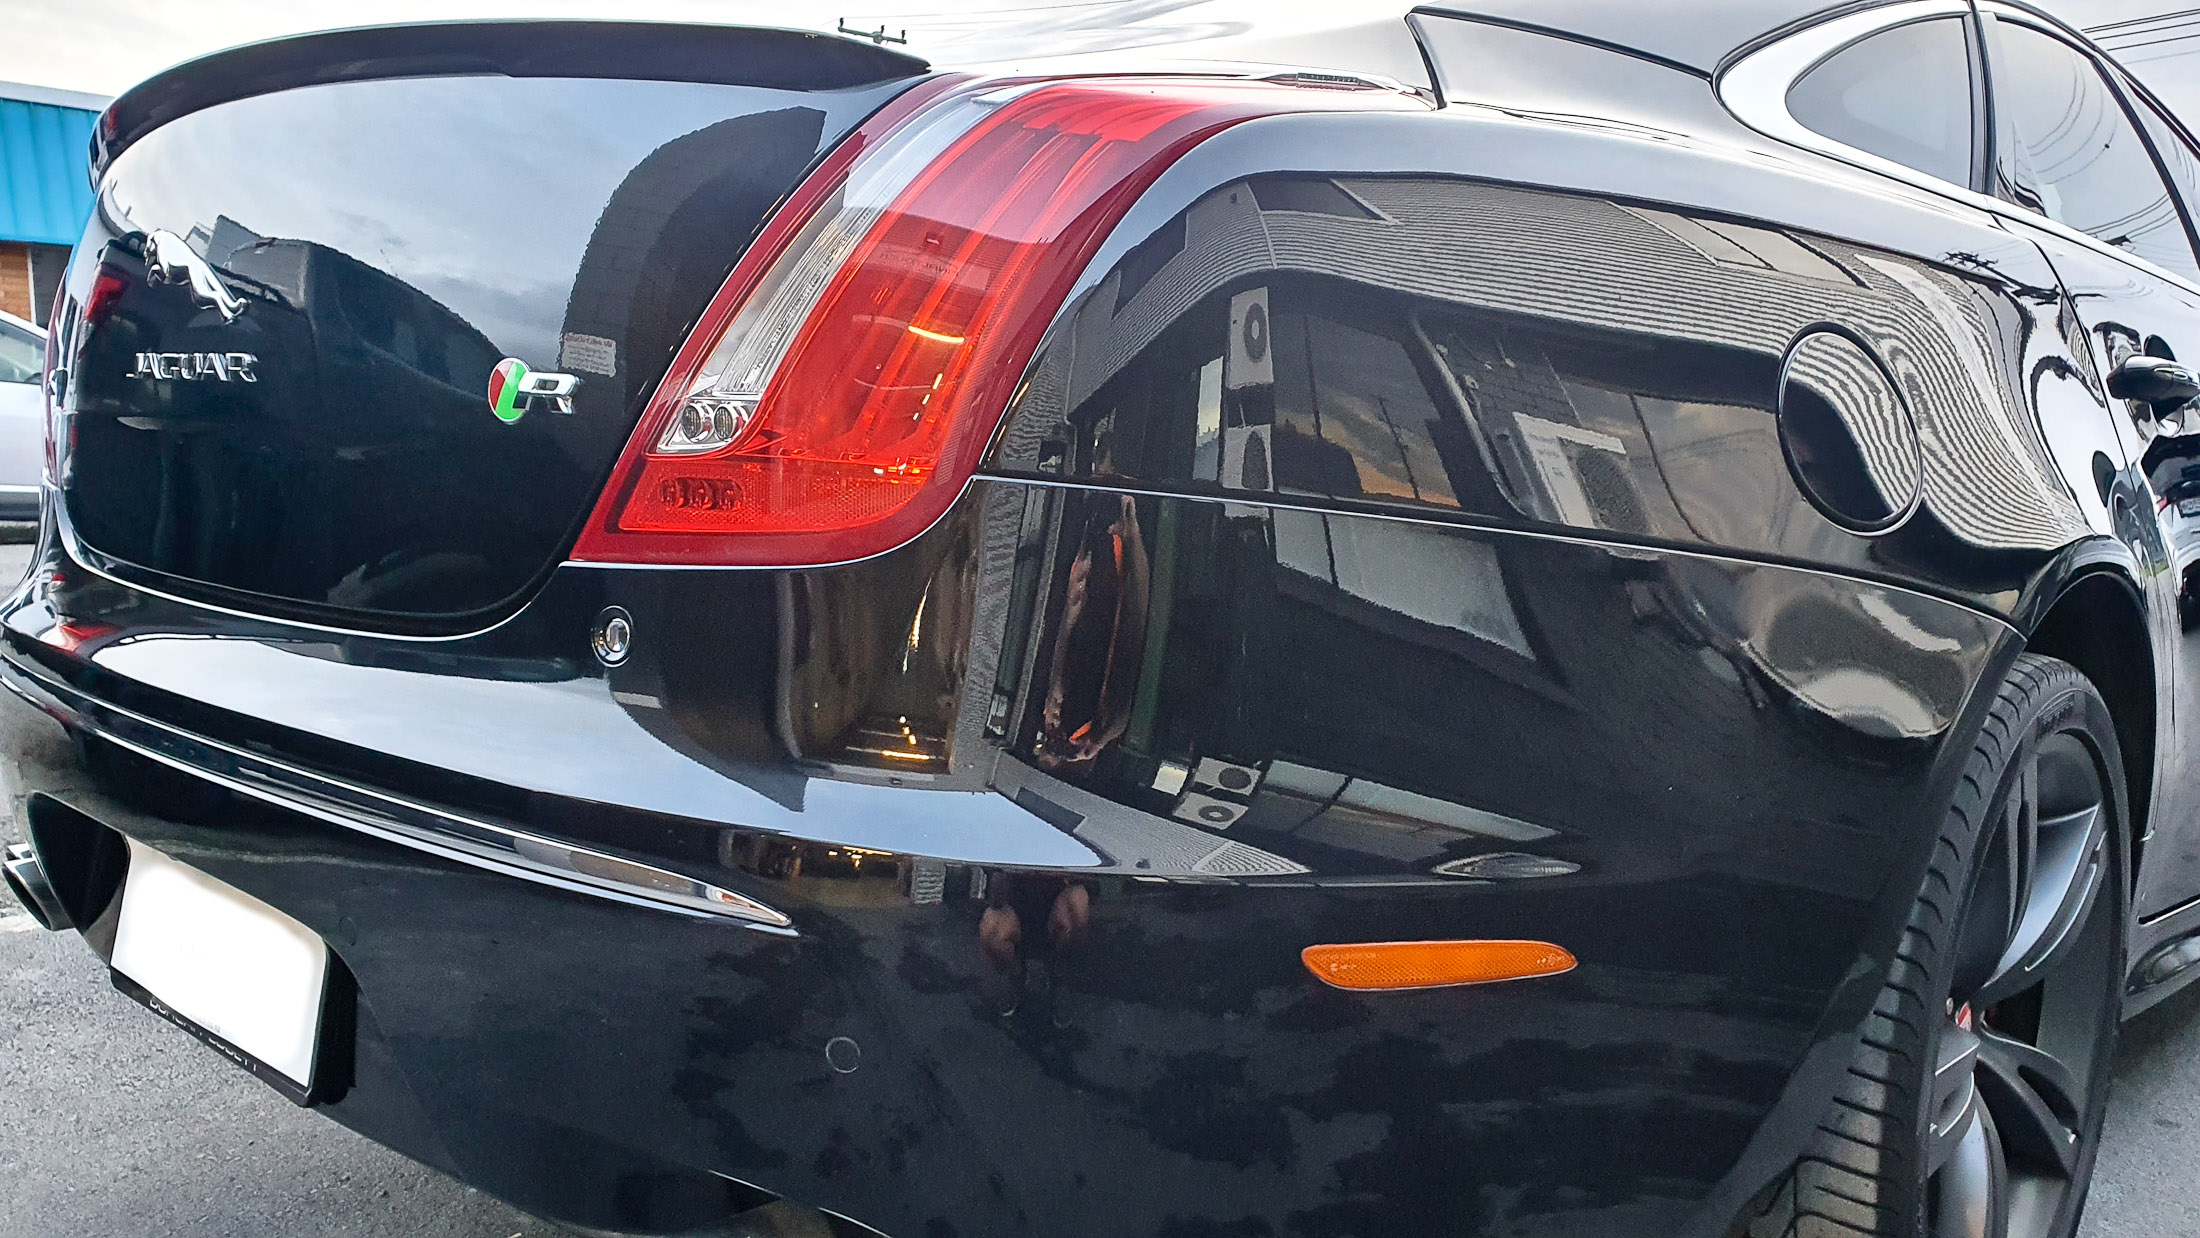 Right rear and boot lid after coating applied showing deep black with high-gloss finish